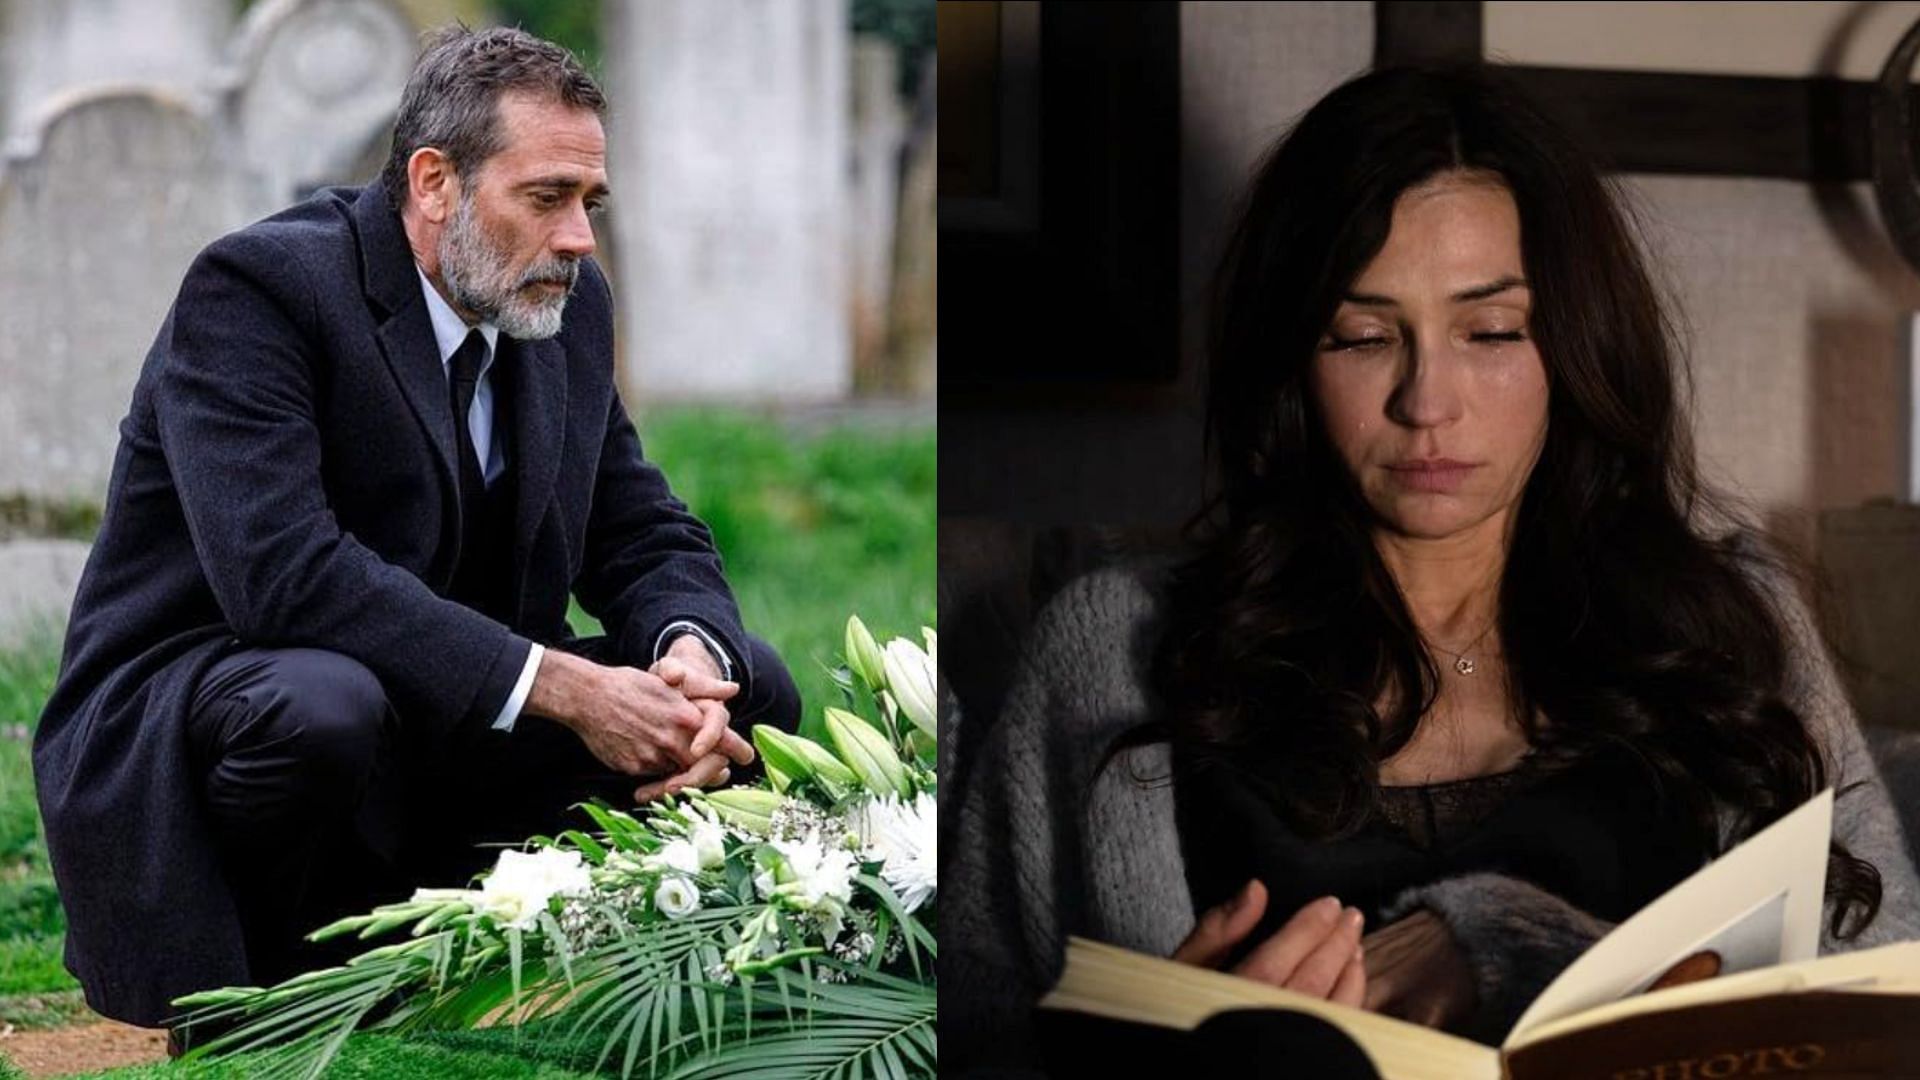 Morgan and Janssen play the bereaved couple in the movie (Image via RLJE Films)